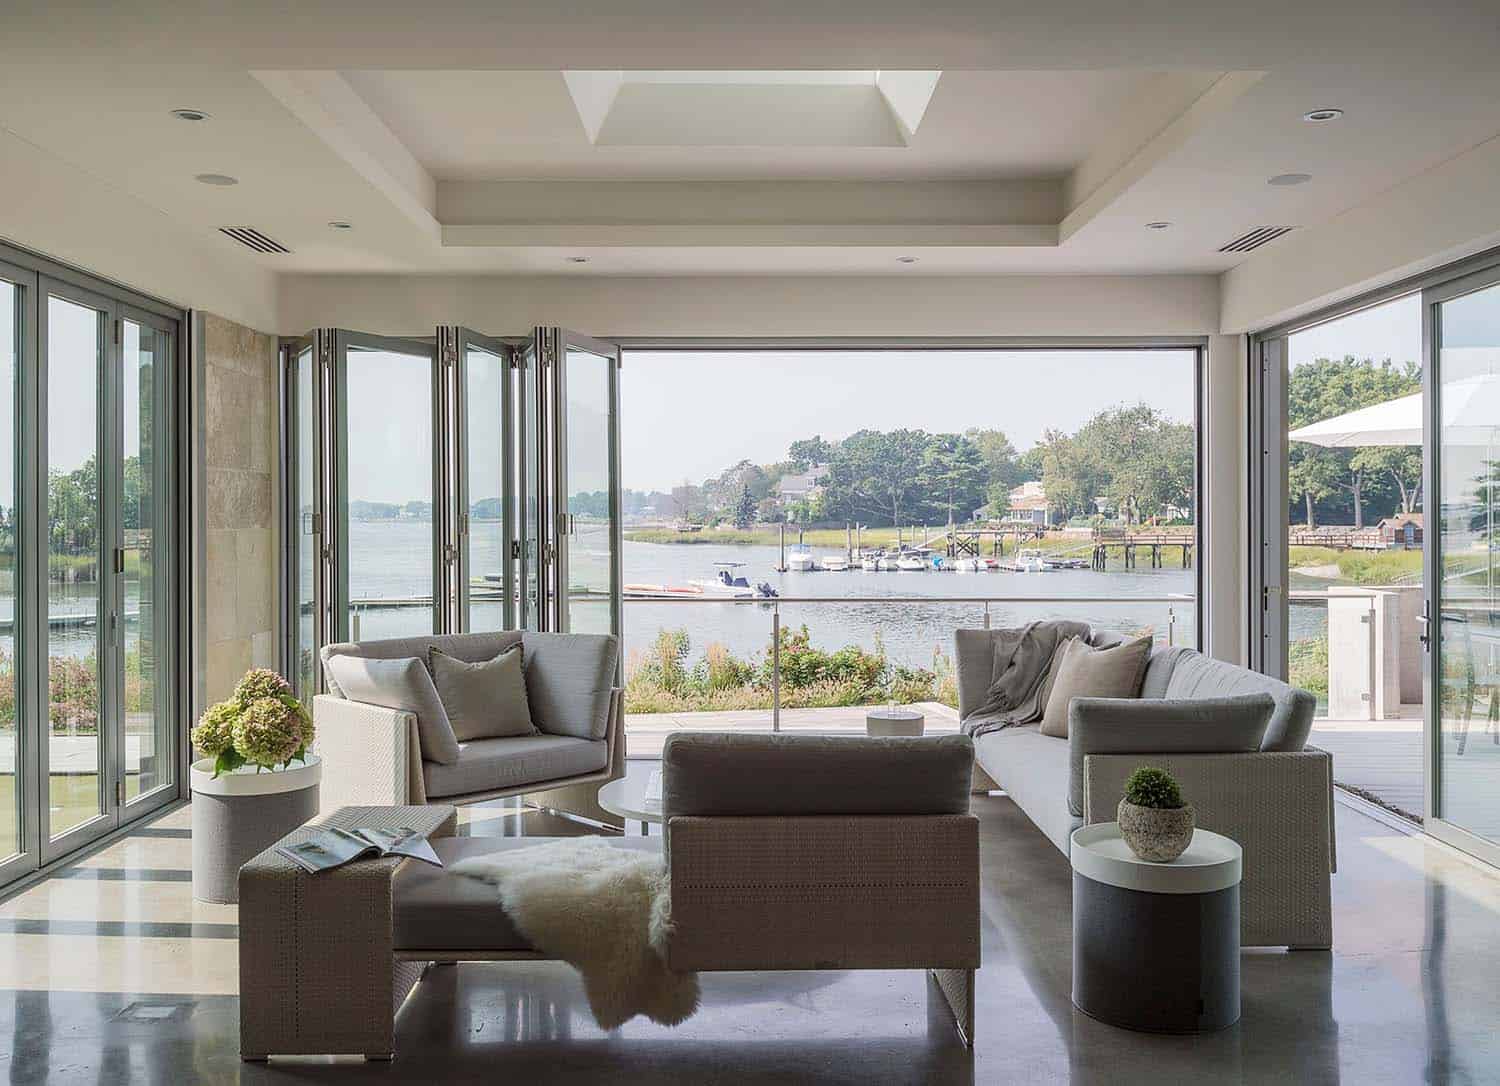 modern sunroom with folding glass doors leading to the outdoor patio and beyond to the waterfront